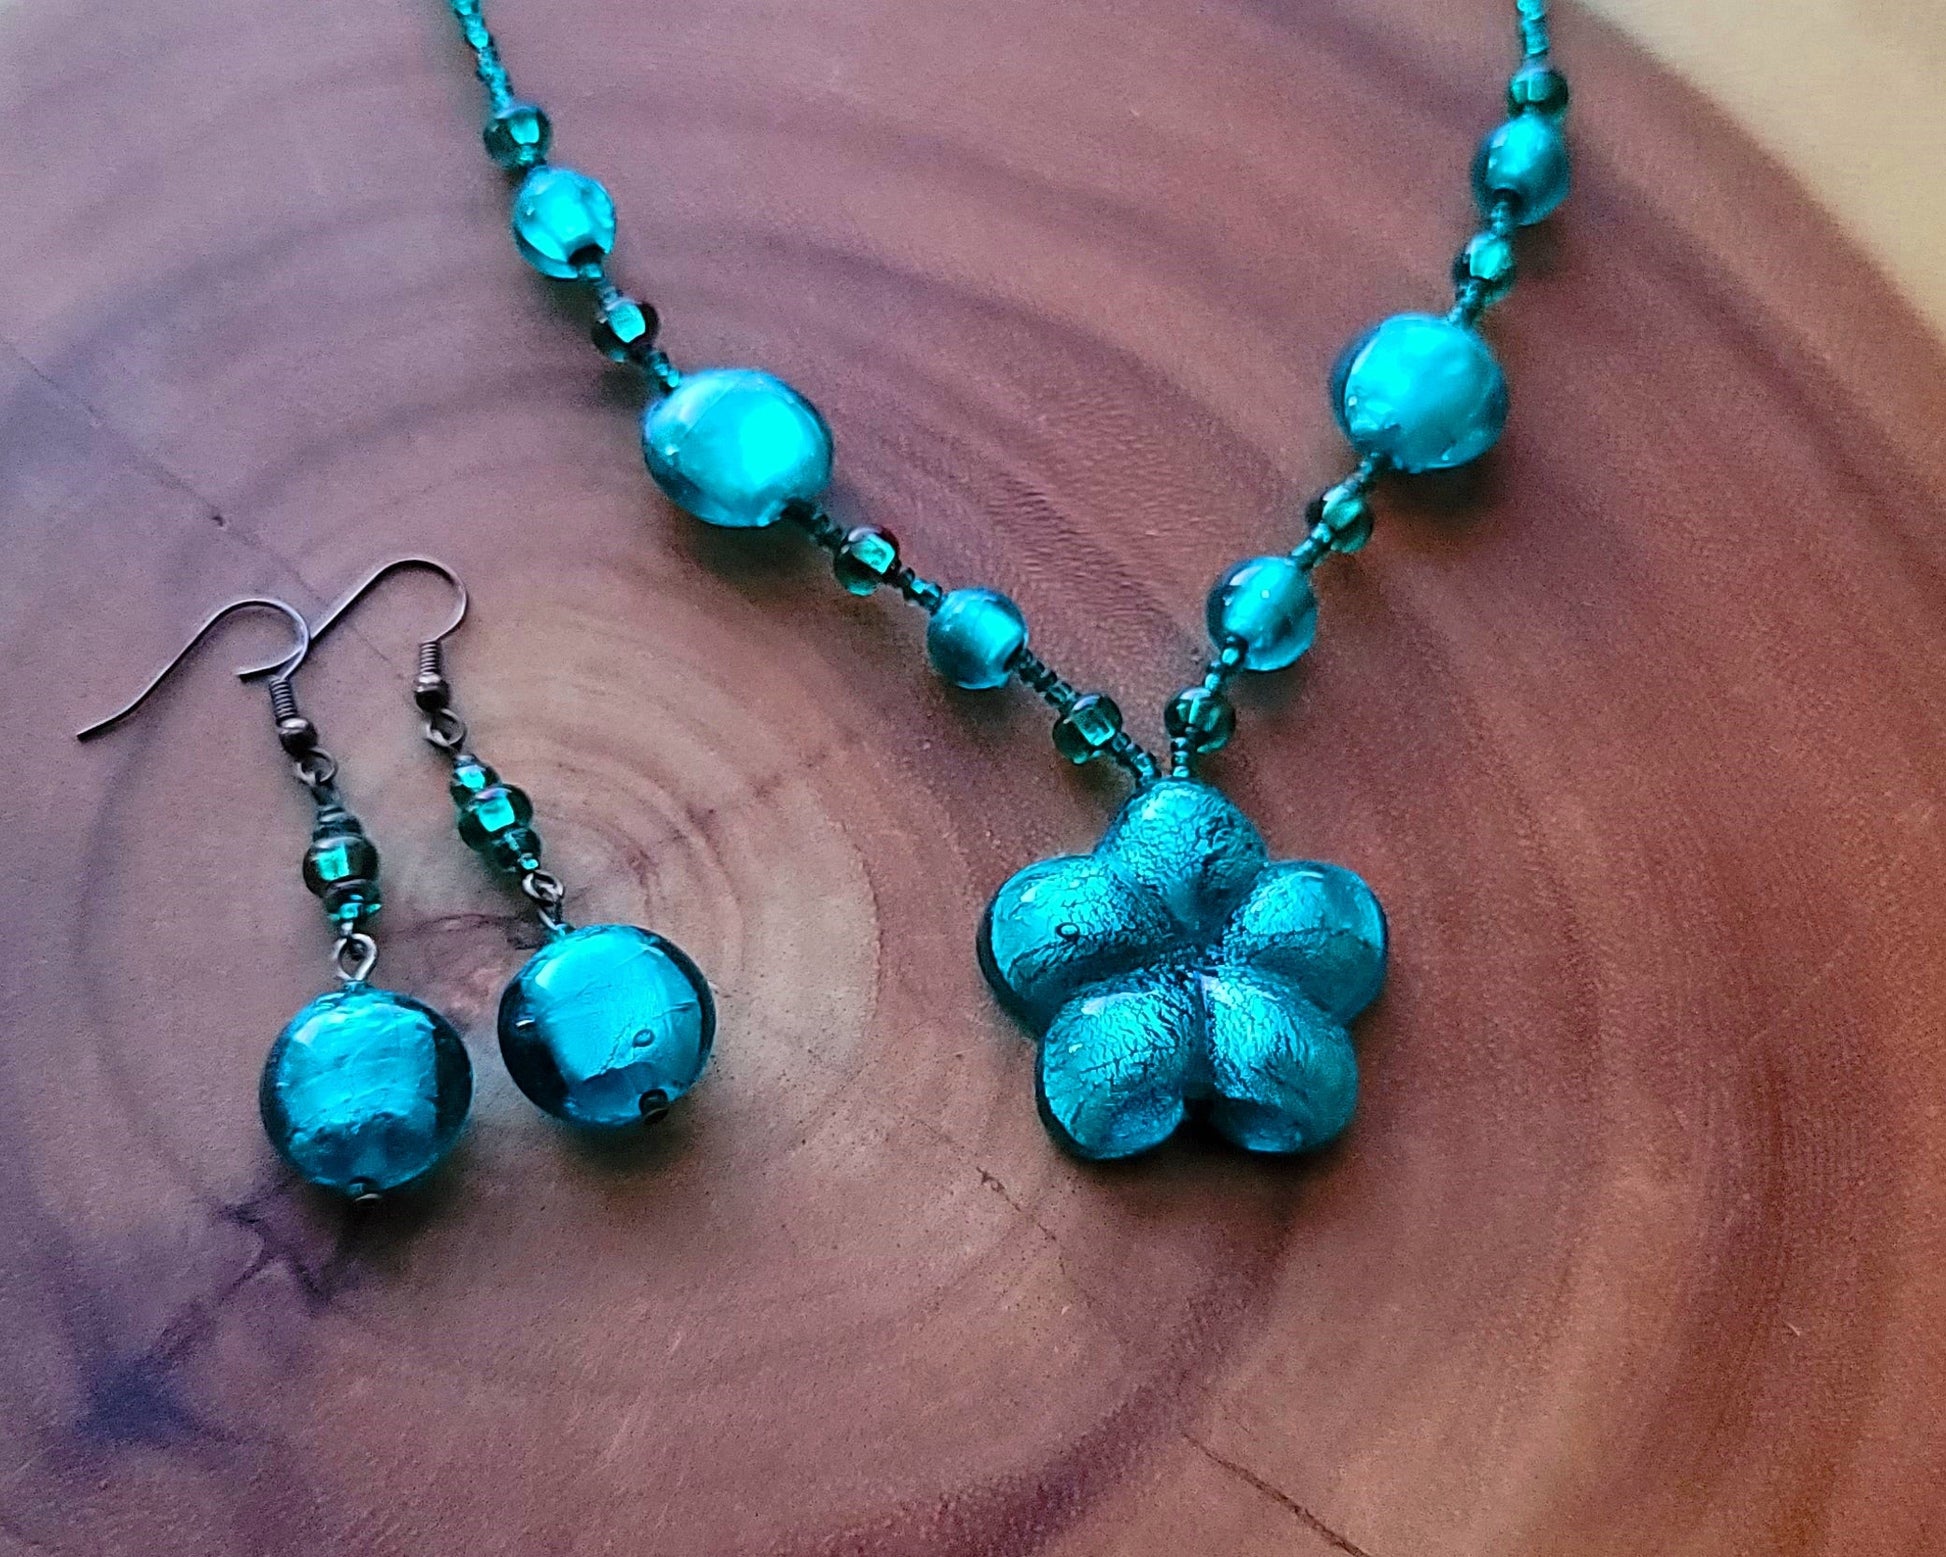 Luminous Teal Flower Necklace and Dangle Earring Set, a beaded teal, blue foil glass flower Necklace and Earrings